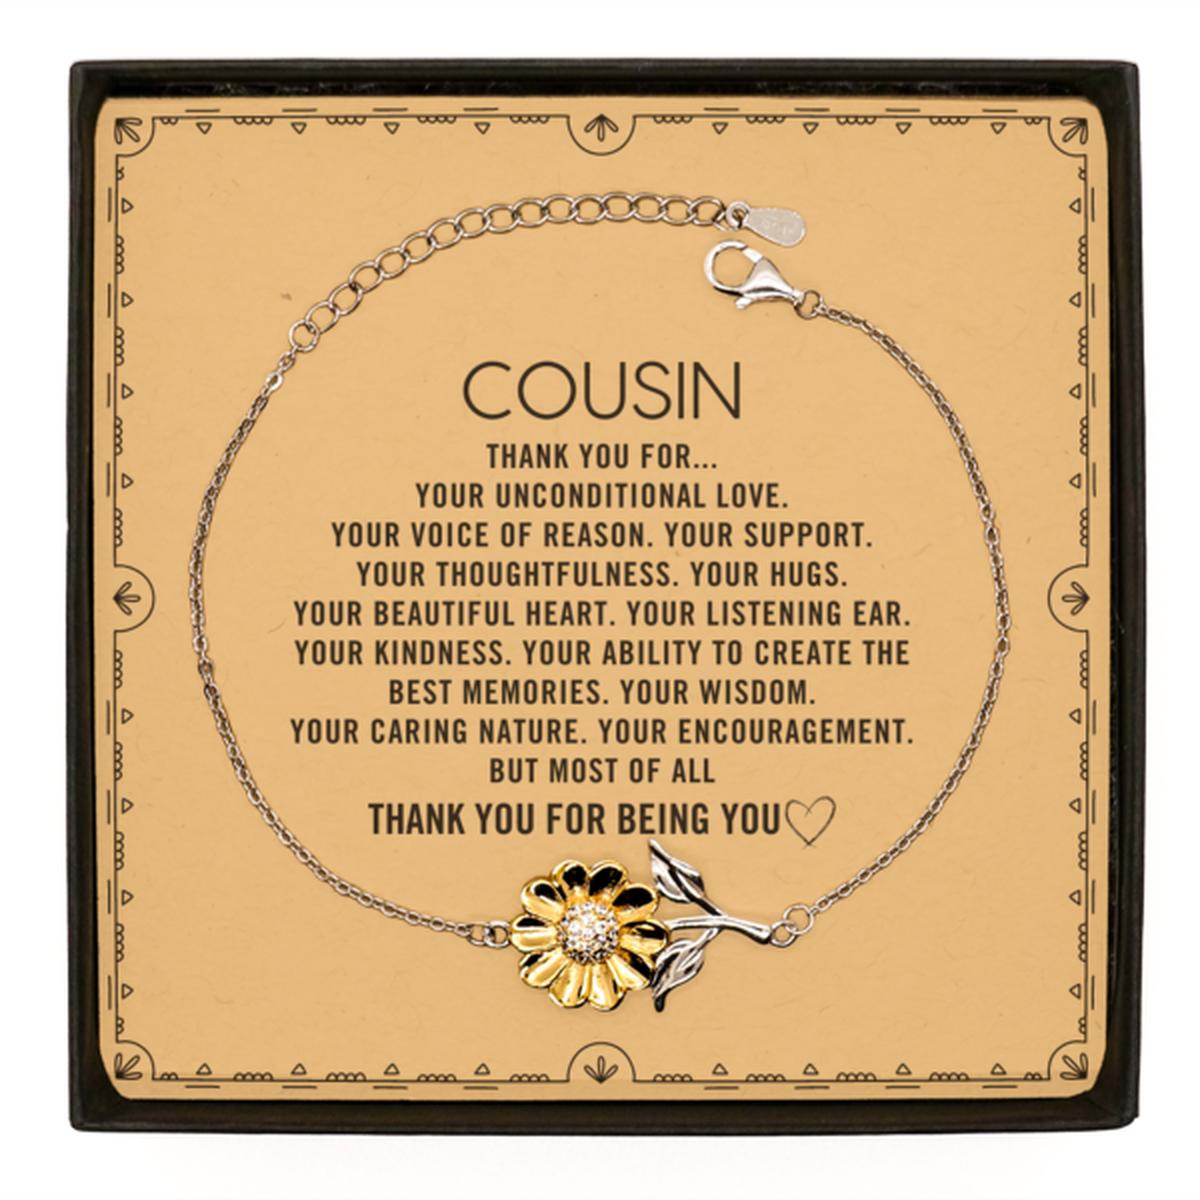 Cousin Sunflower Bracelet Custom, Message Card Gifts For Cousin Christmas Graduation Birthday Gifts for Men Women Cousin Thank you for Your unconditional love